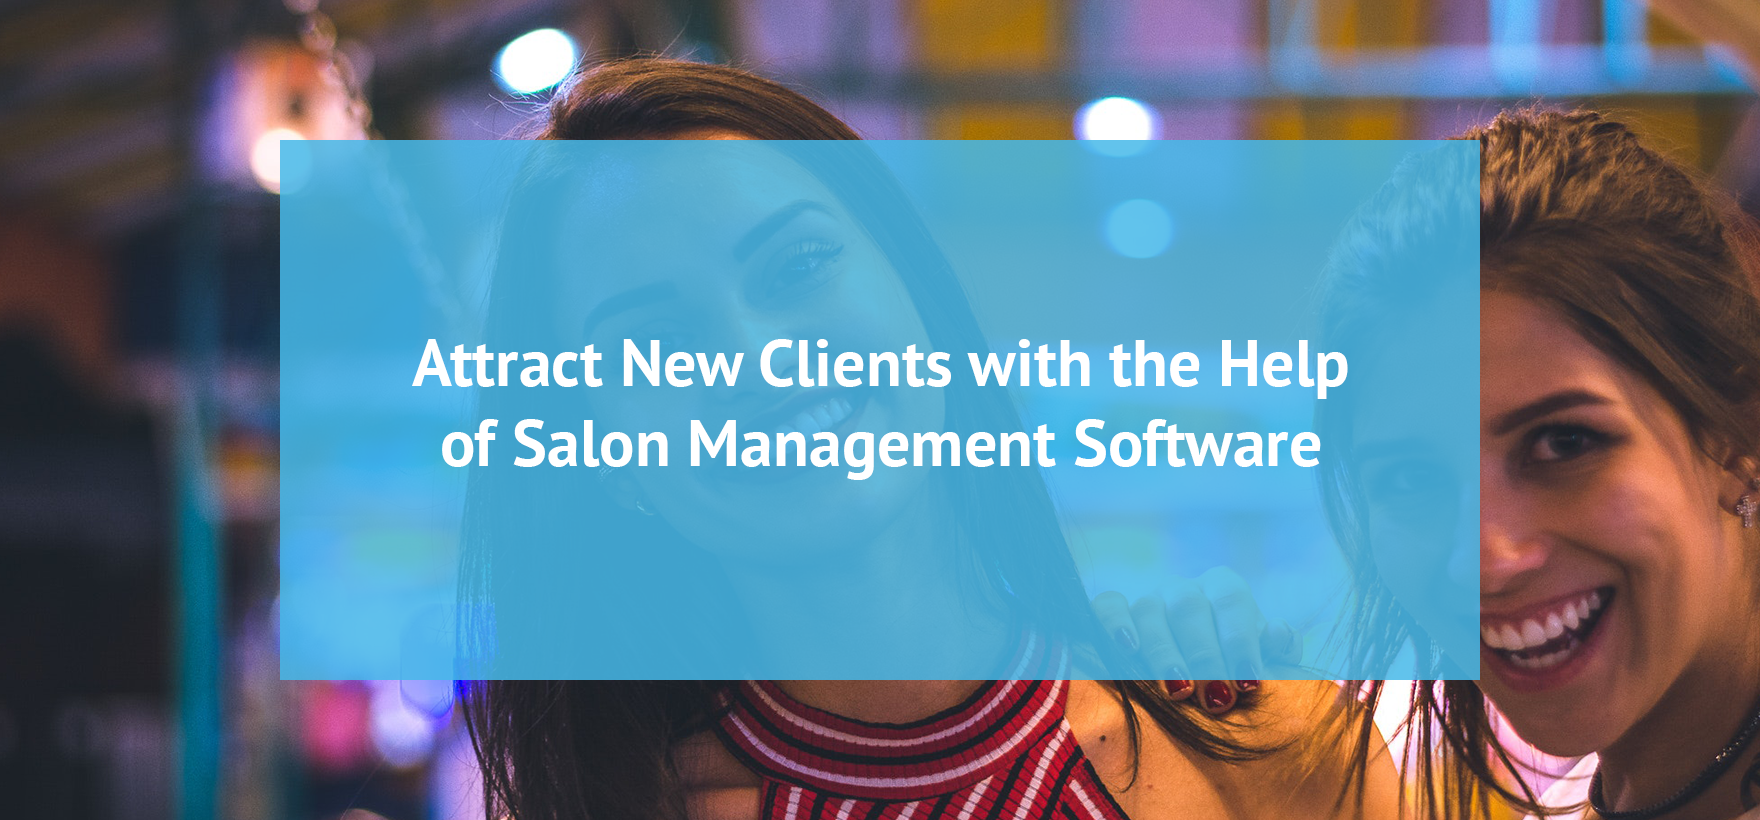 Attract New Clients with the Help of Salon Management Software